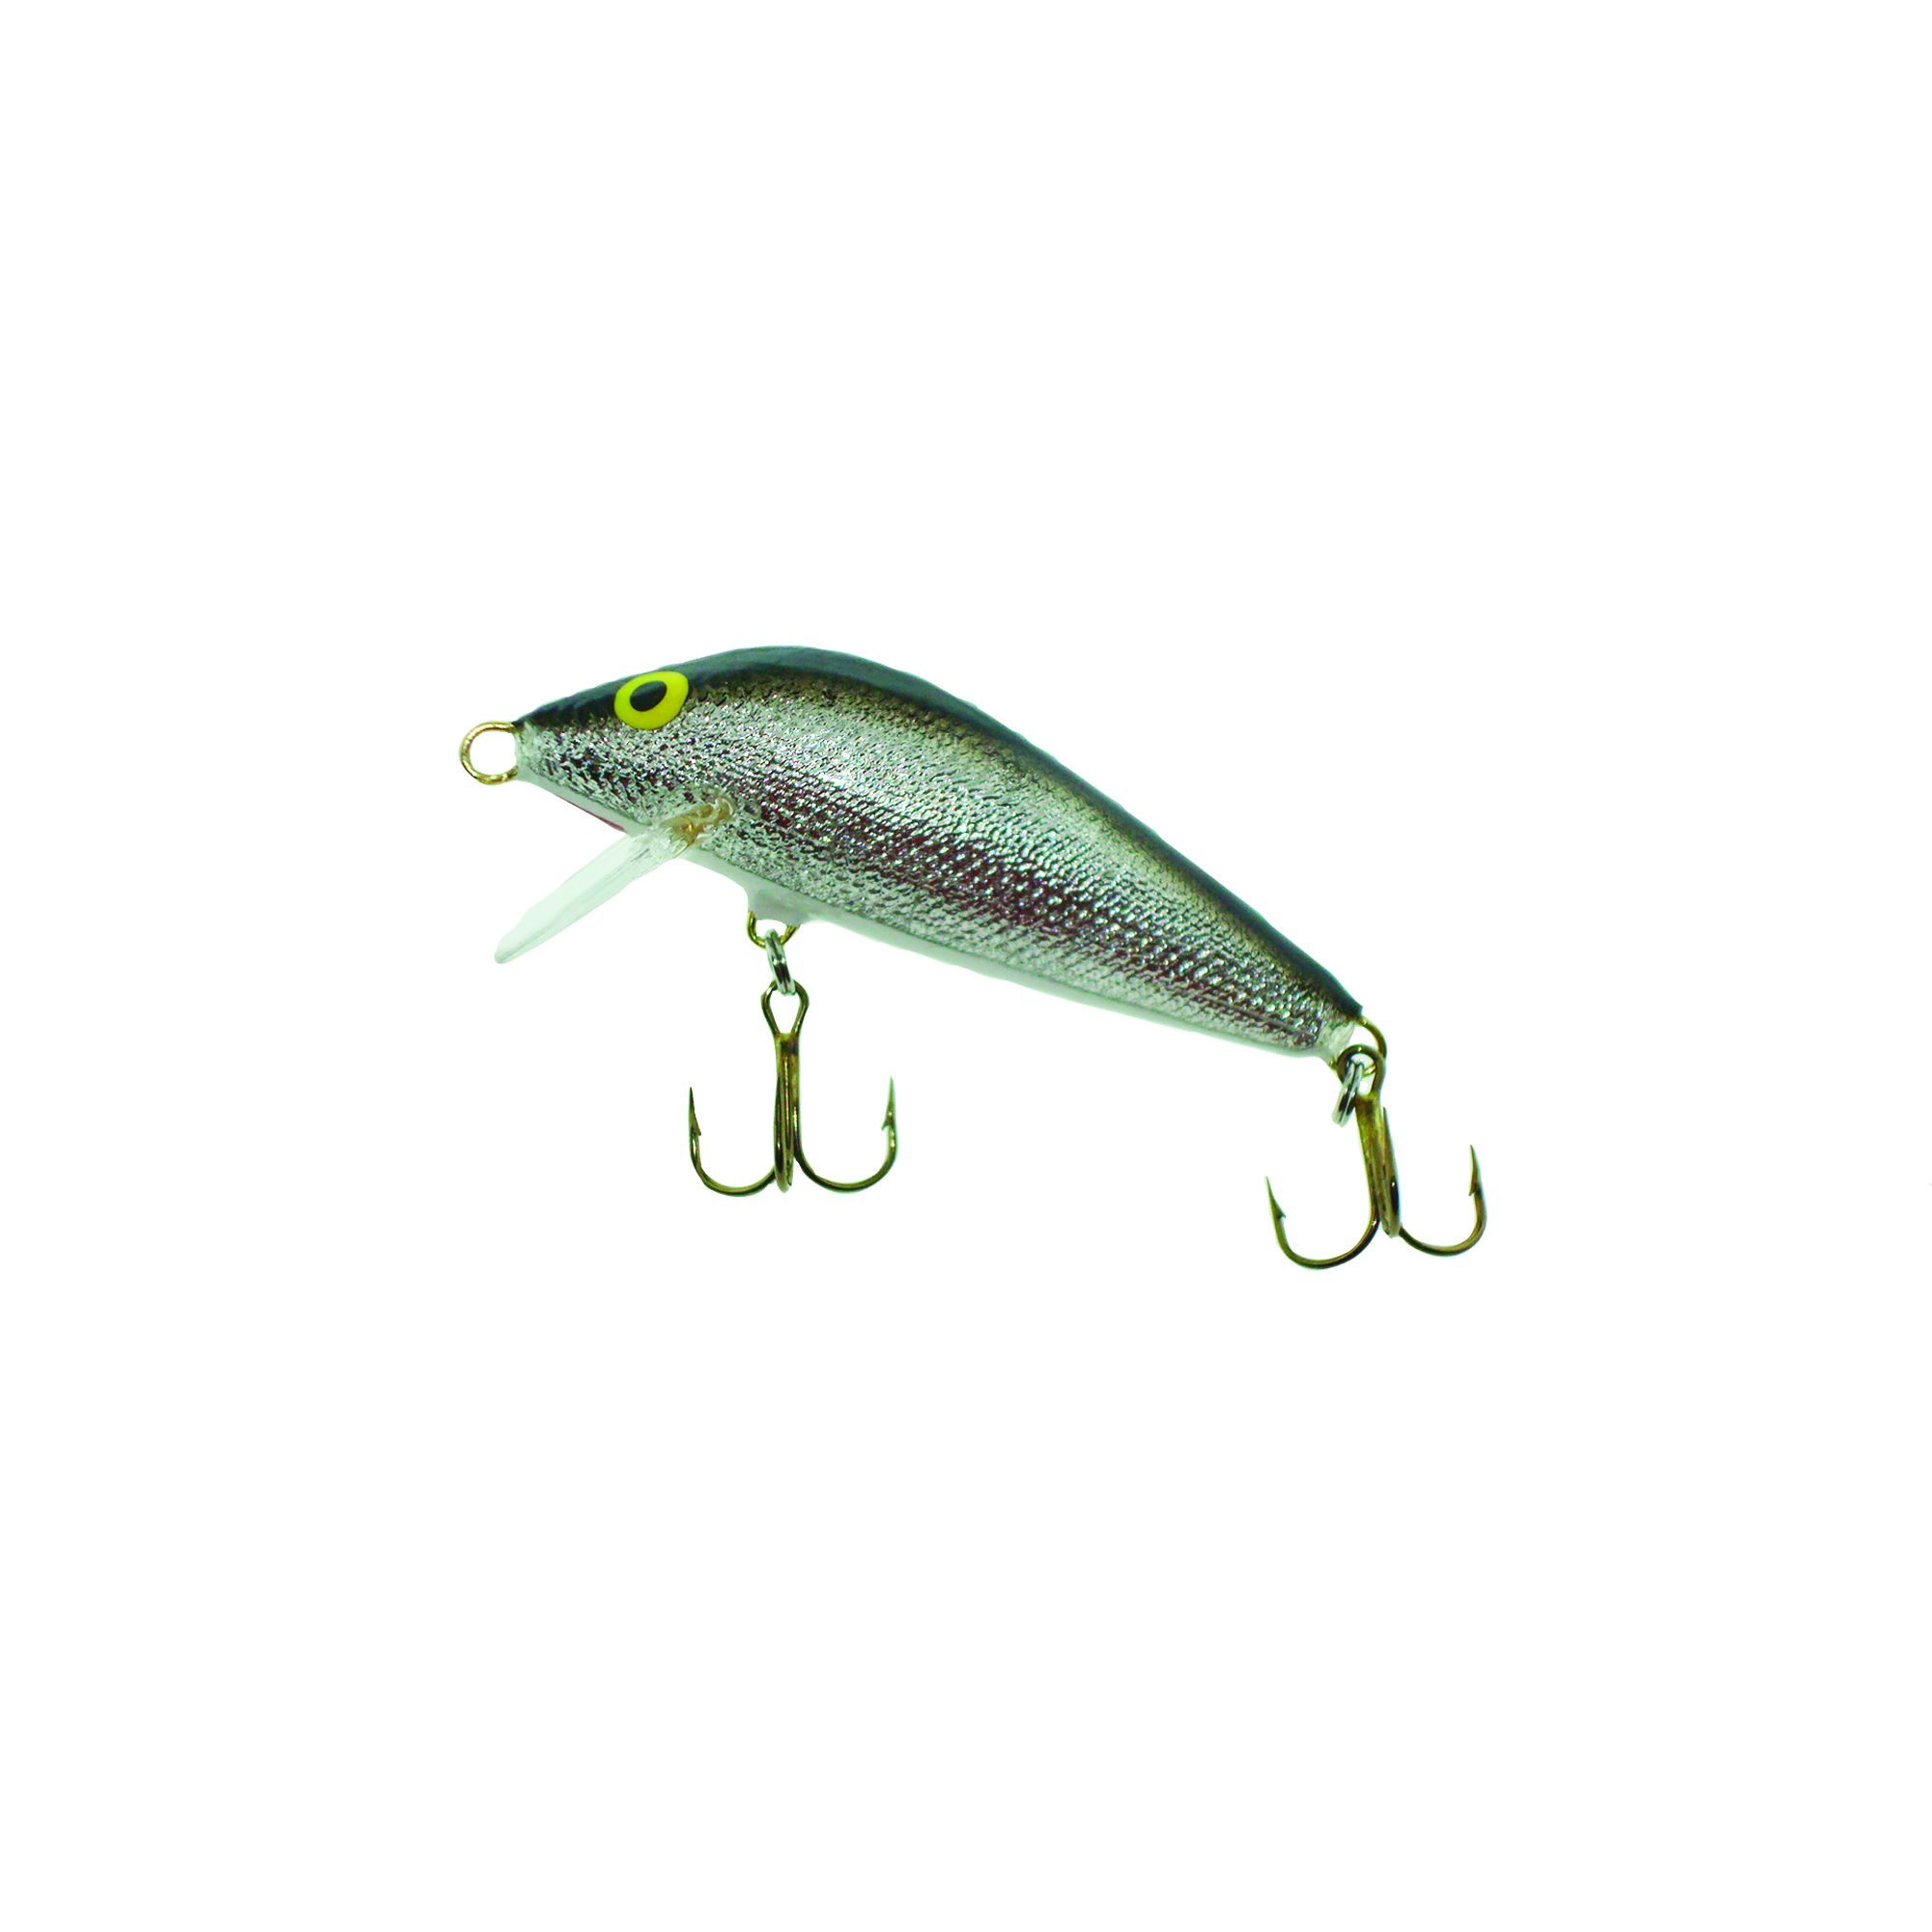 A.C SHINERS 300 SHALLOW DIVER MINNOW 3" ORANGE BACK/GOLD BELLY 300-07 SHINER 